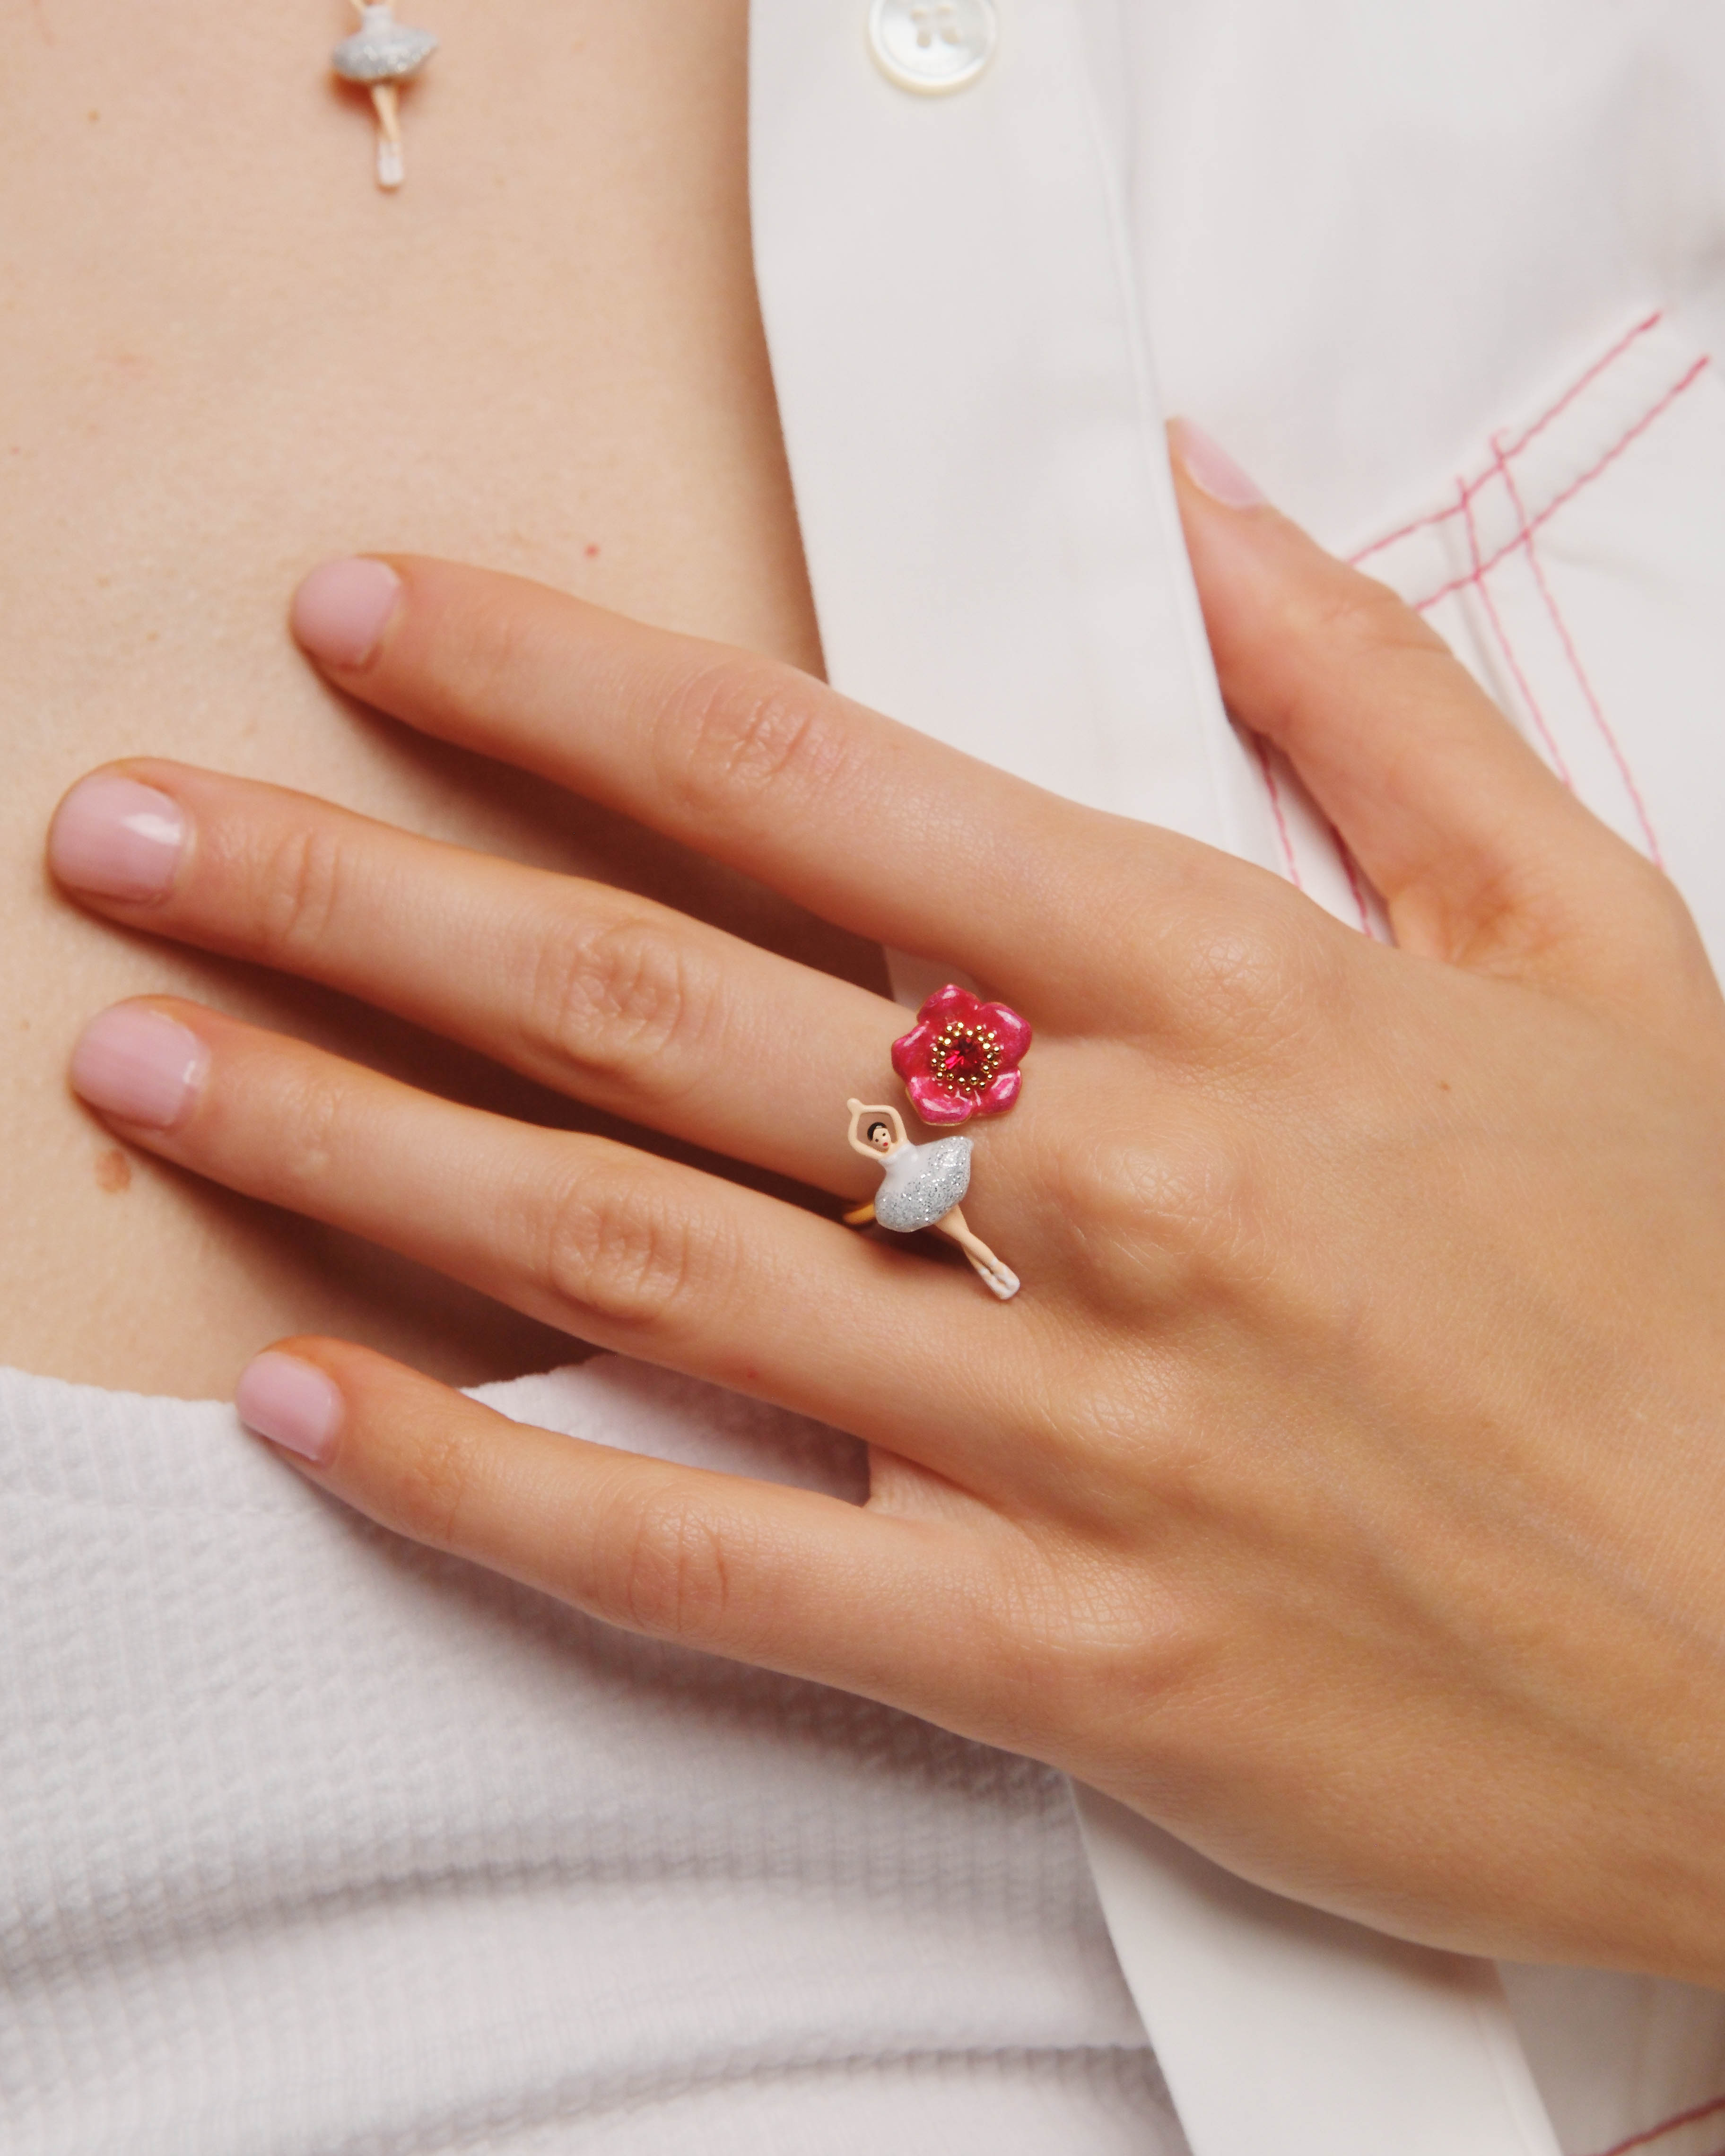 Ballerina and red flower adjustable ring